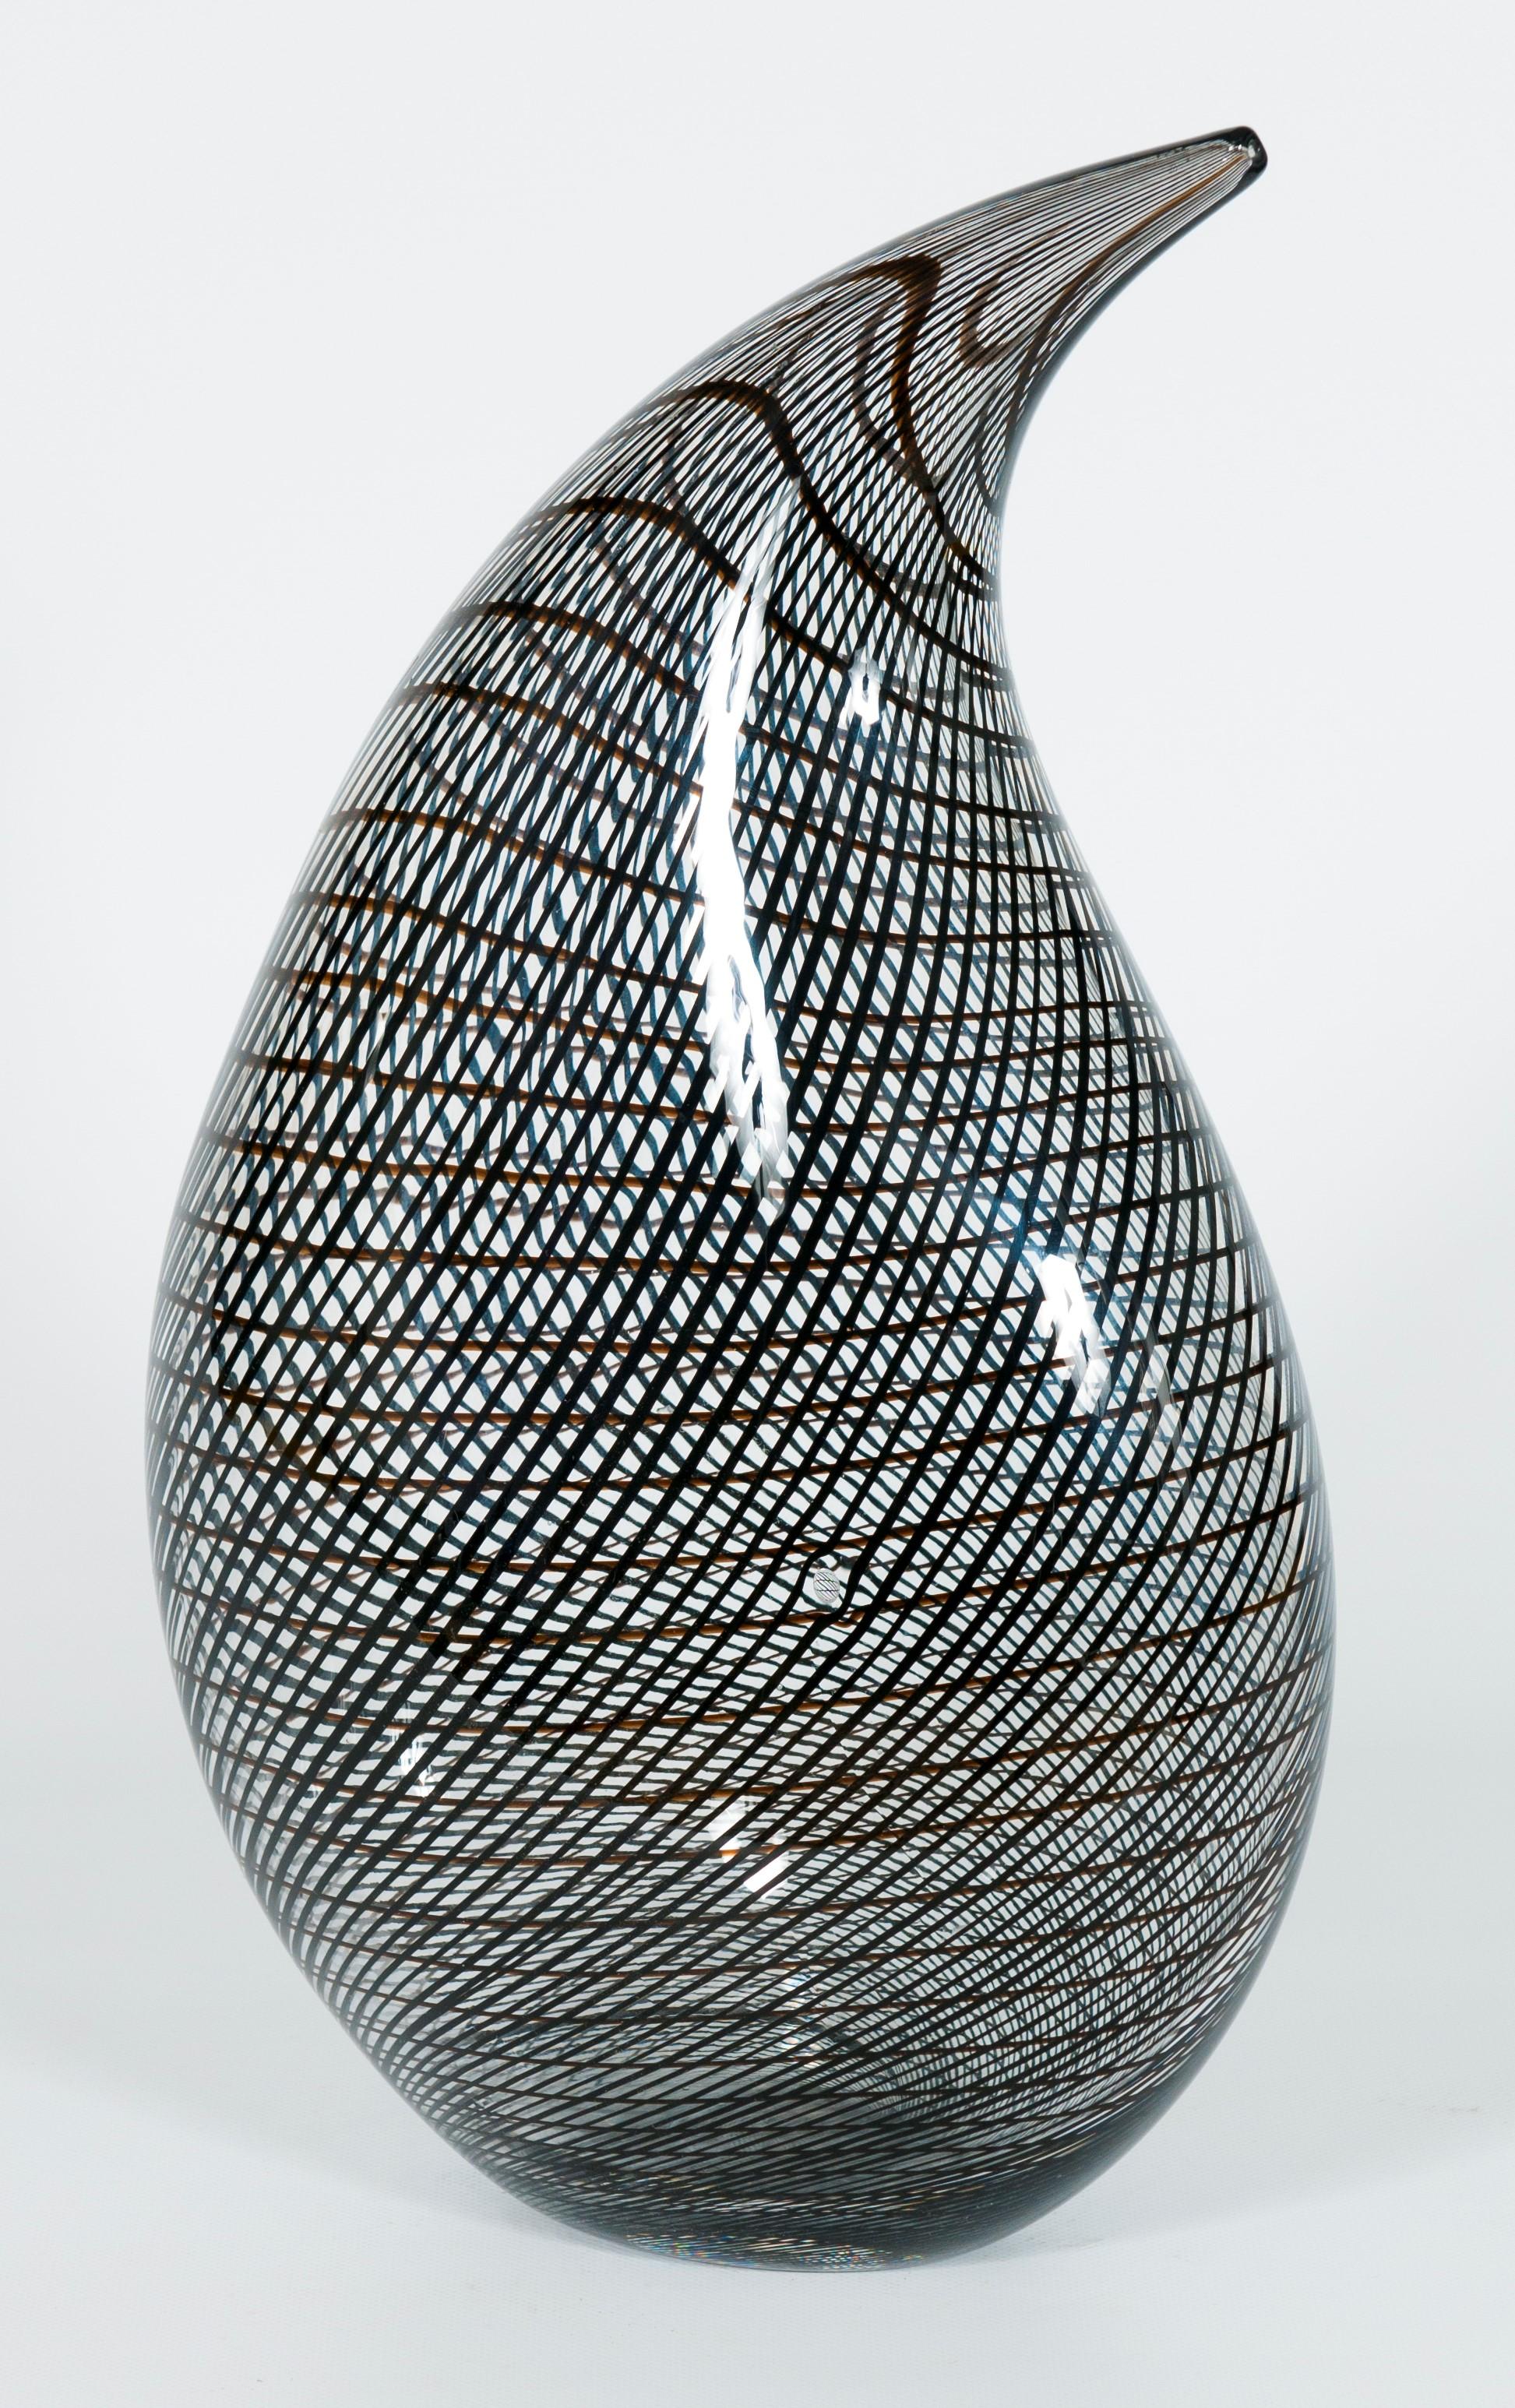 Italian Murano Glass Artistic Sculpture Attributed to Tagliapietra, 1990s.
This is an amazing sculpture realized with transparent Murano glass and many black submerged glass canes that intersect each other, adapting themselves to the surface shape.